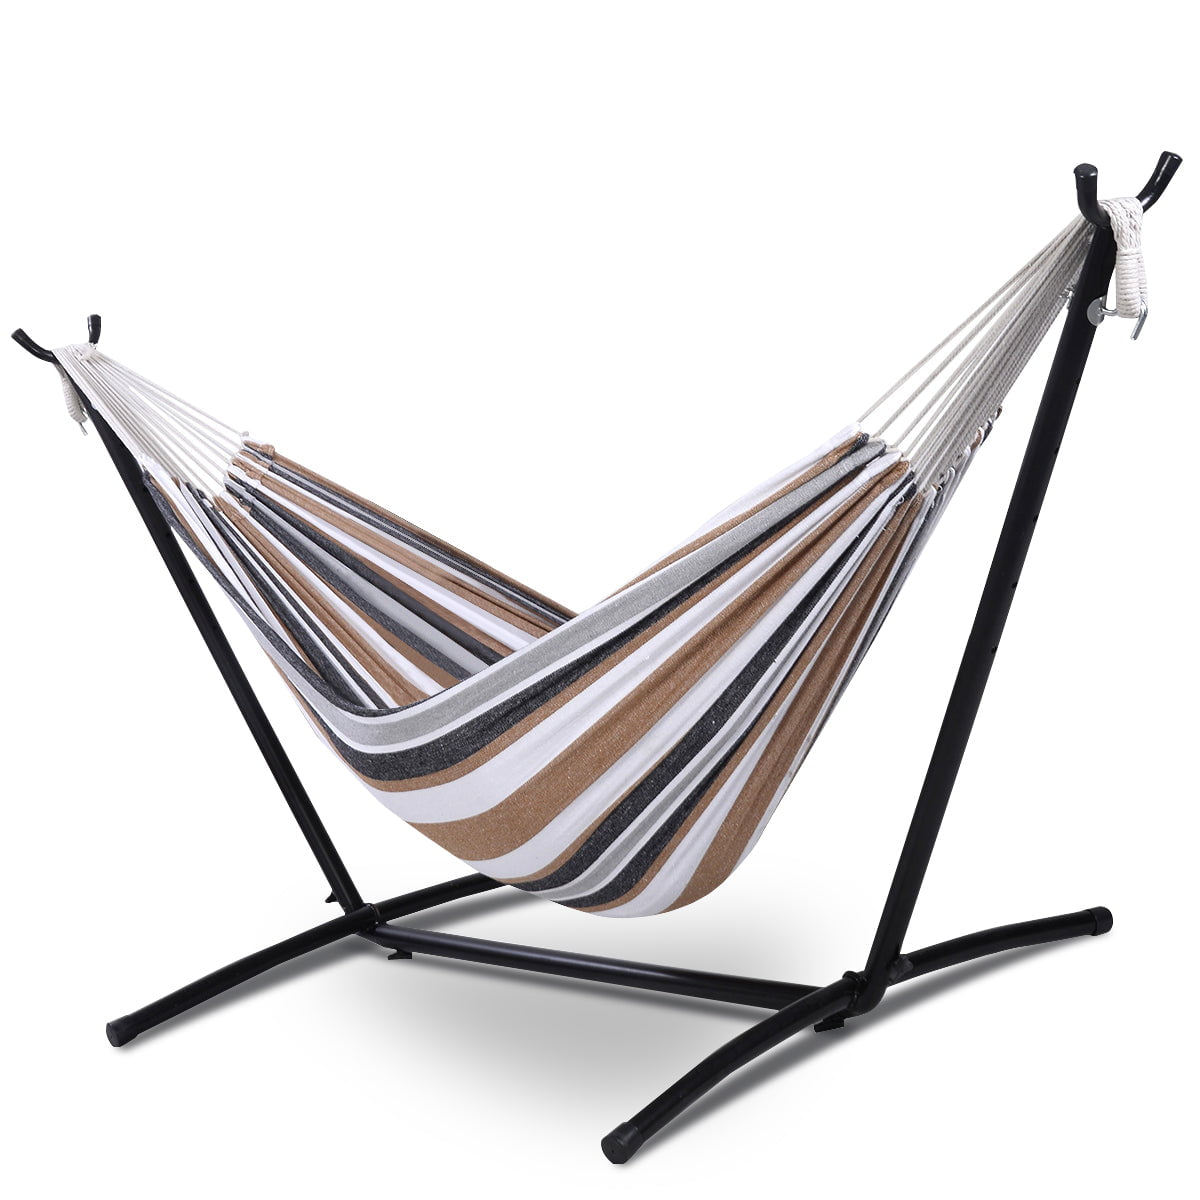 CozyBox Premium 2-Person Portable Hammock with Premium Canvas and 450 LB Capacity Metal Stand Great for Patio Beach Camping Tailgate